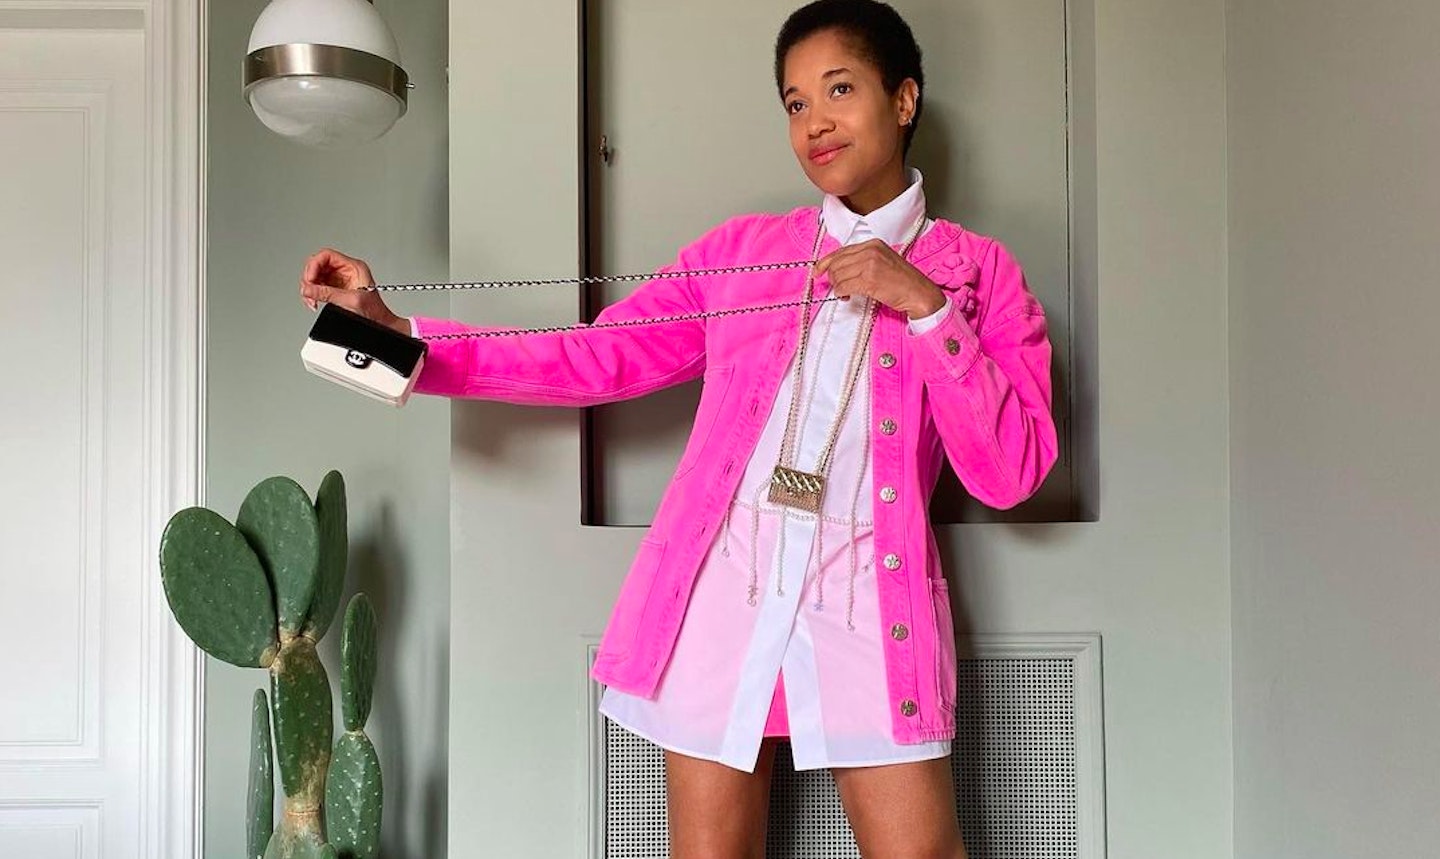 Tamu McPherson wearing a bright pink blazer and carrying Chanel bags